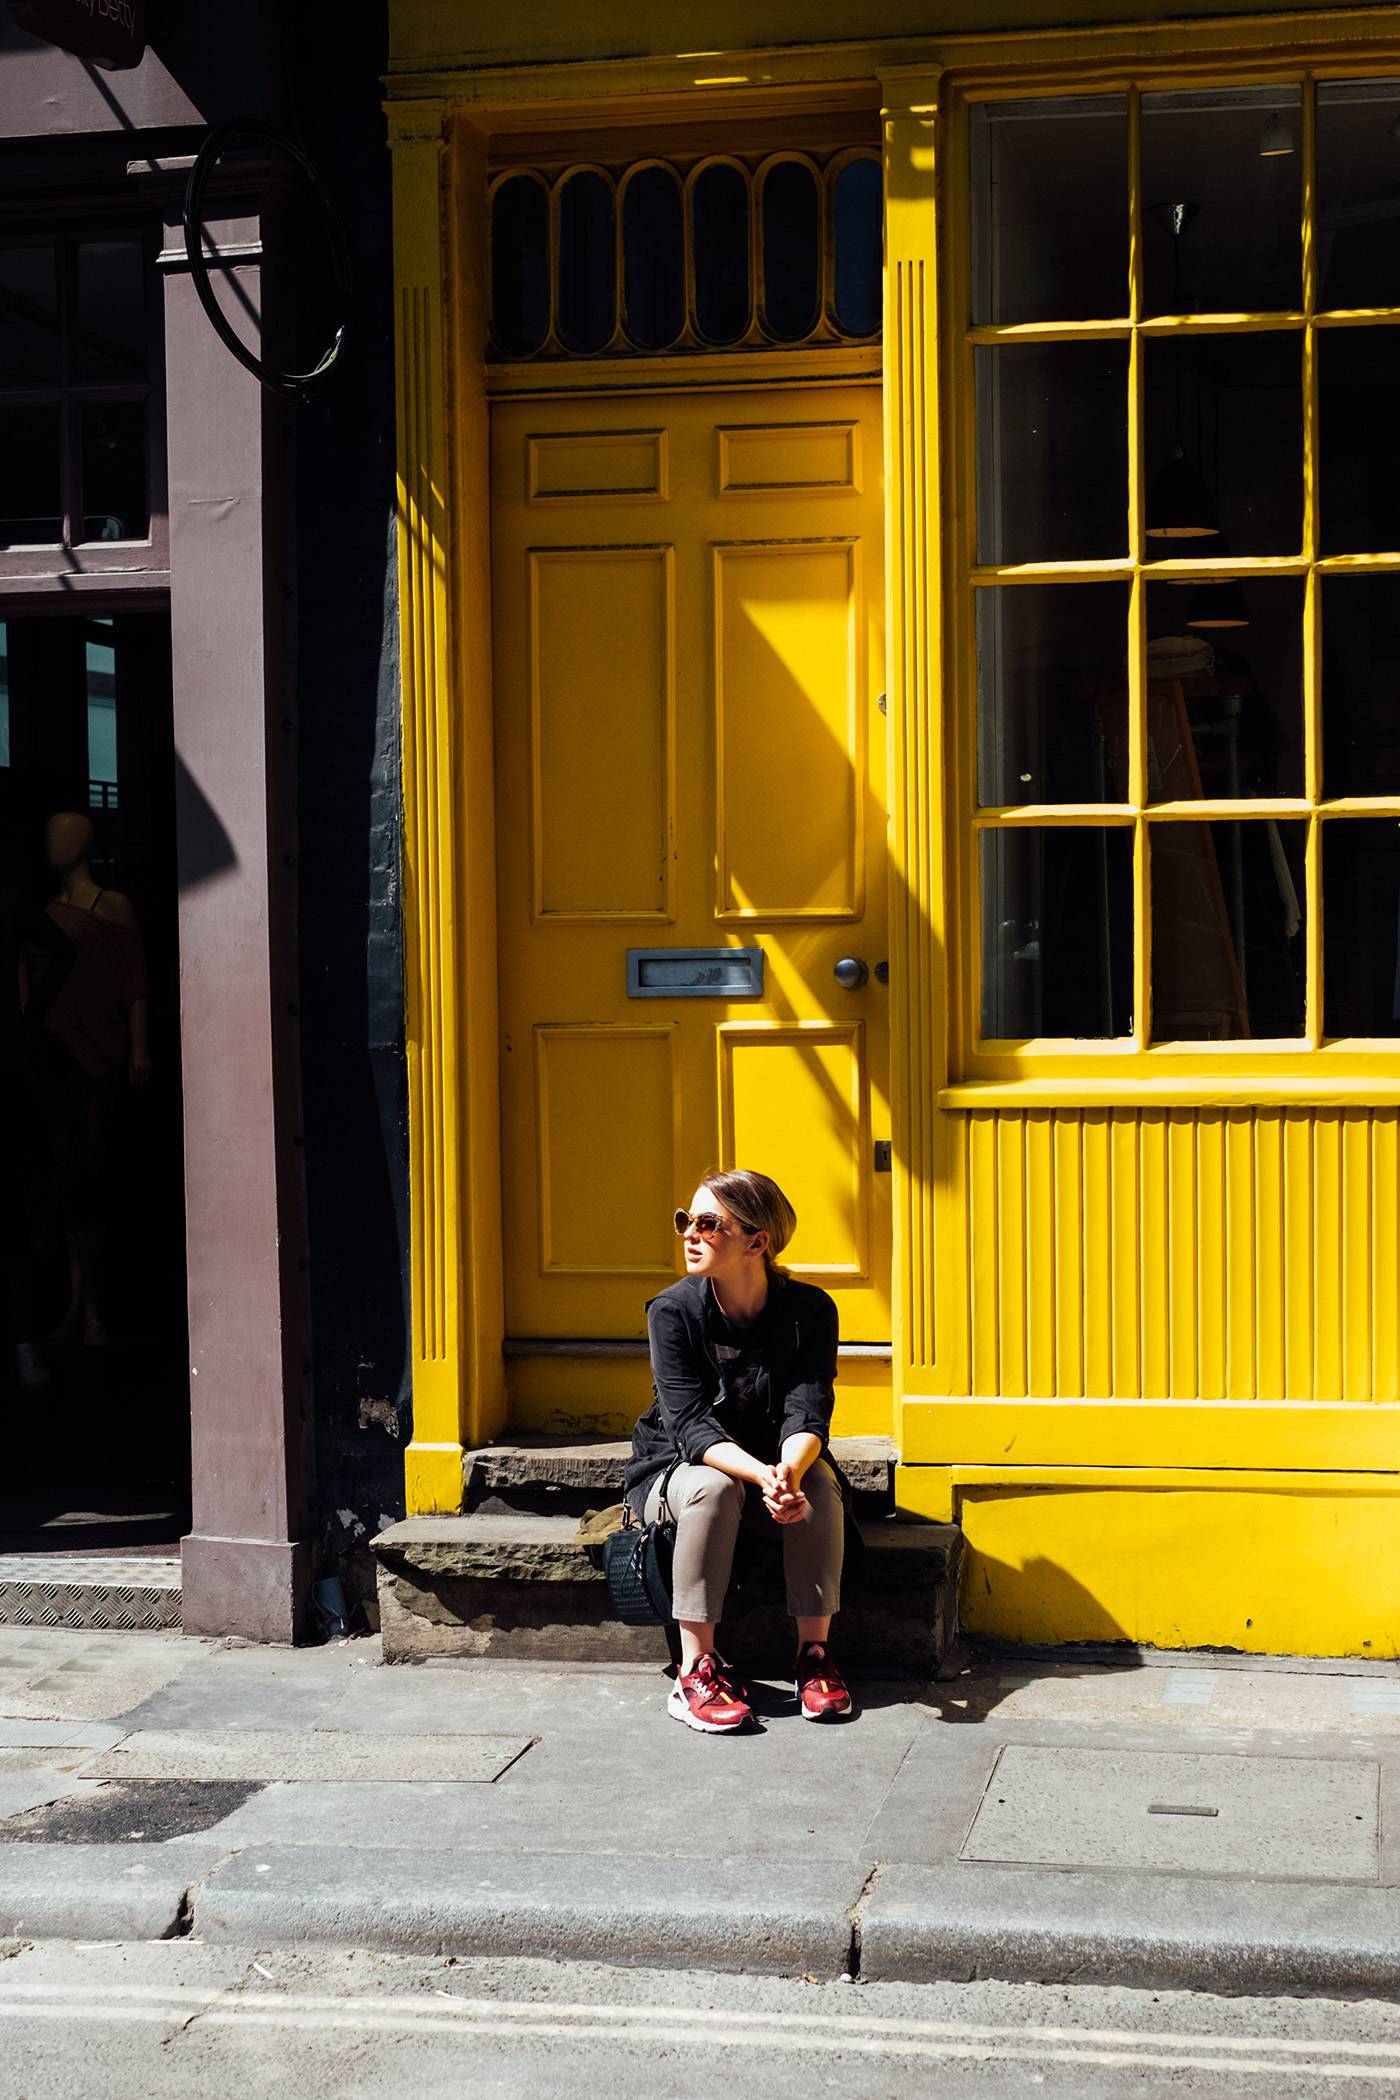 Young Woman Sitting on the Street in Front of the Bright Yellow Shop